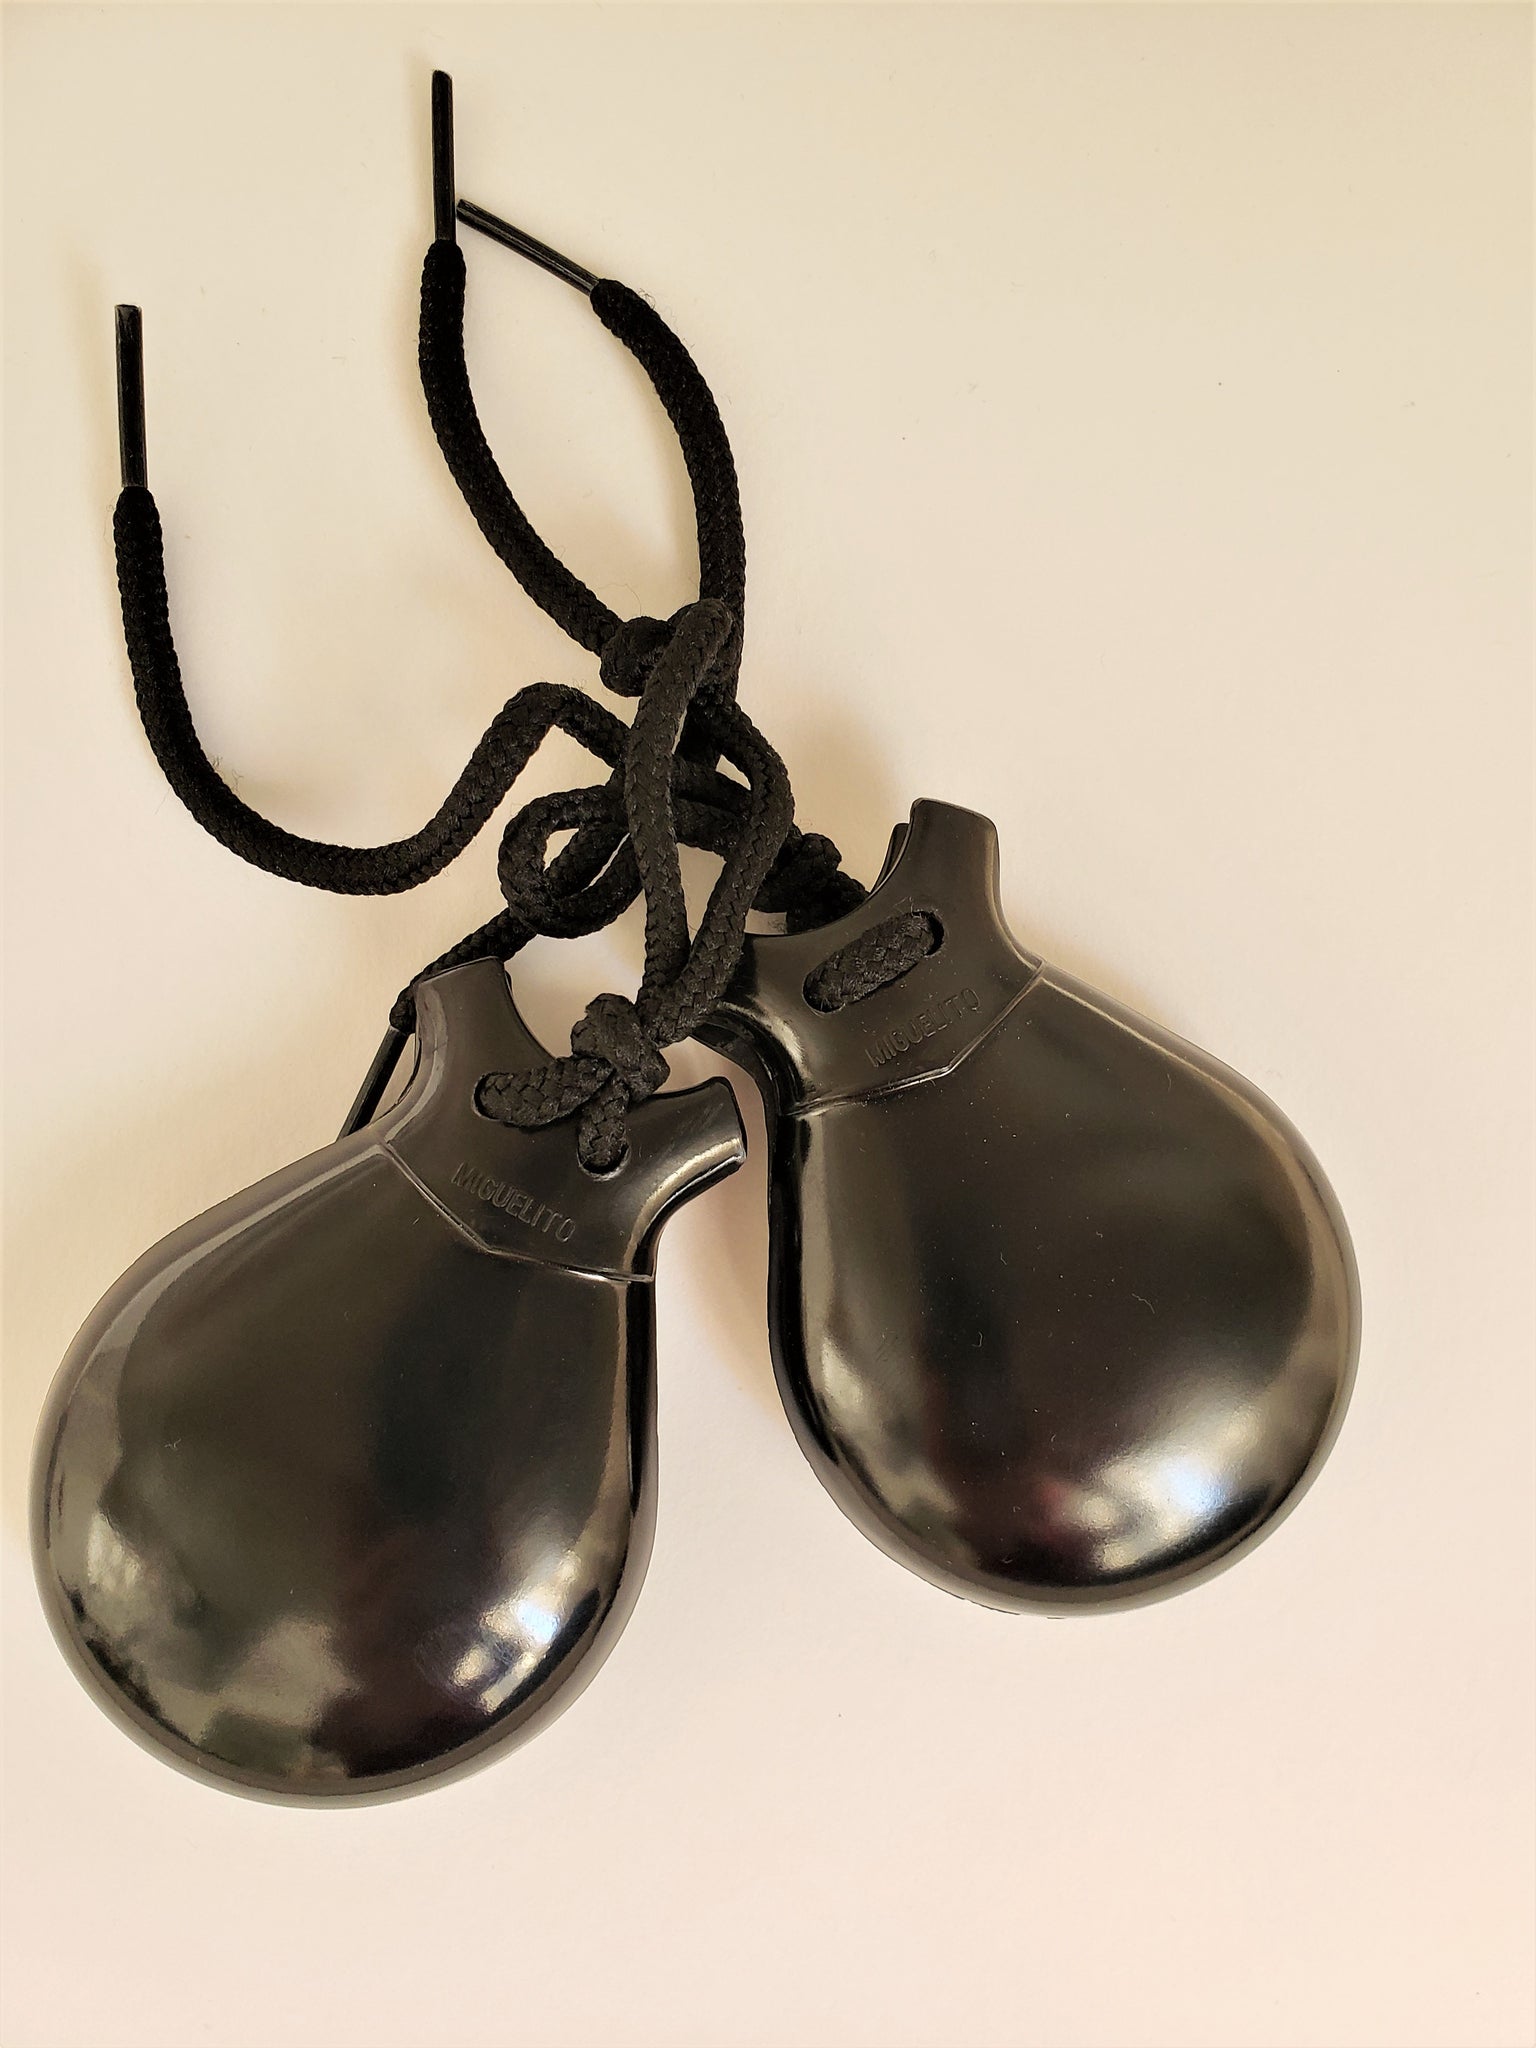 Miguelito's Resin Castanets